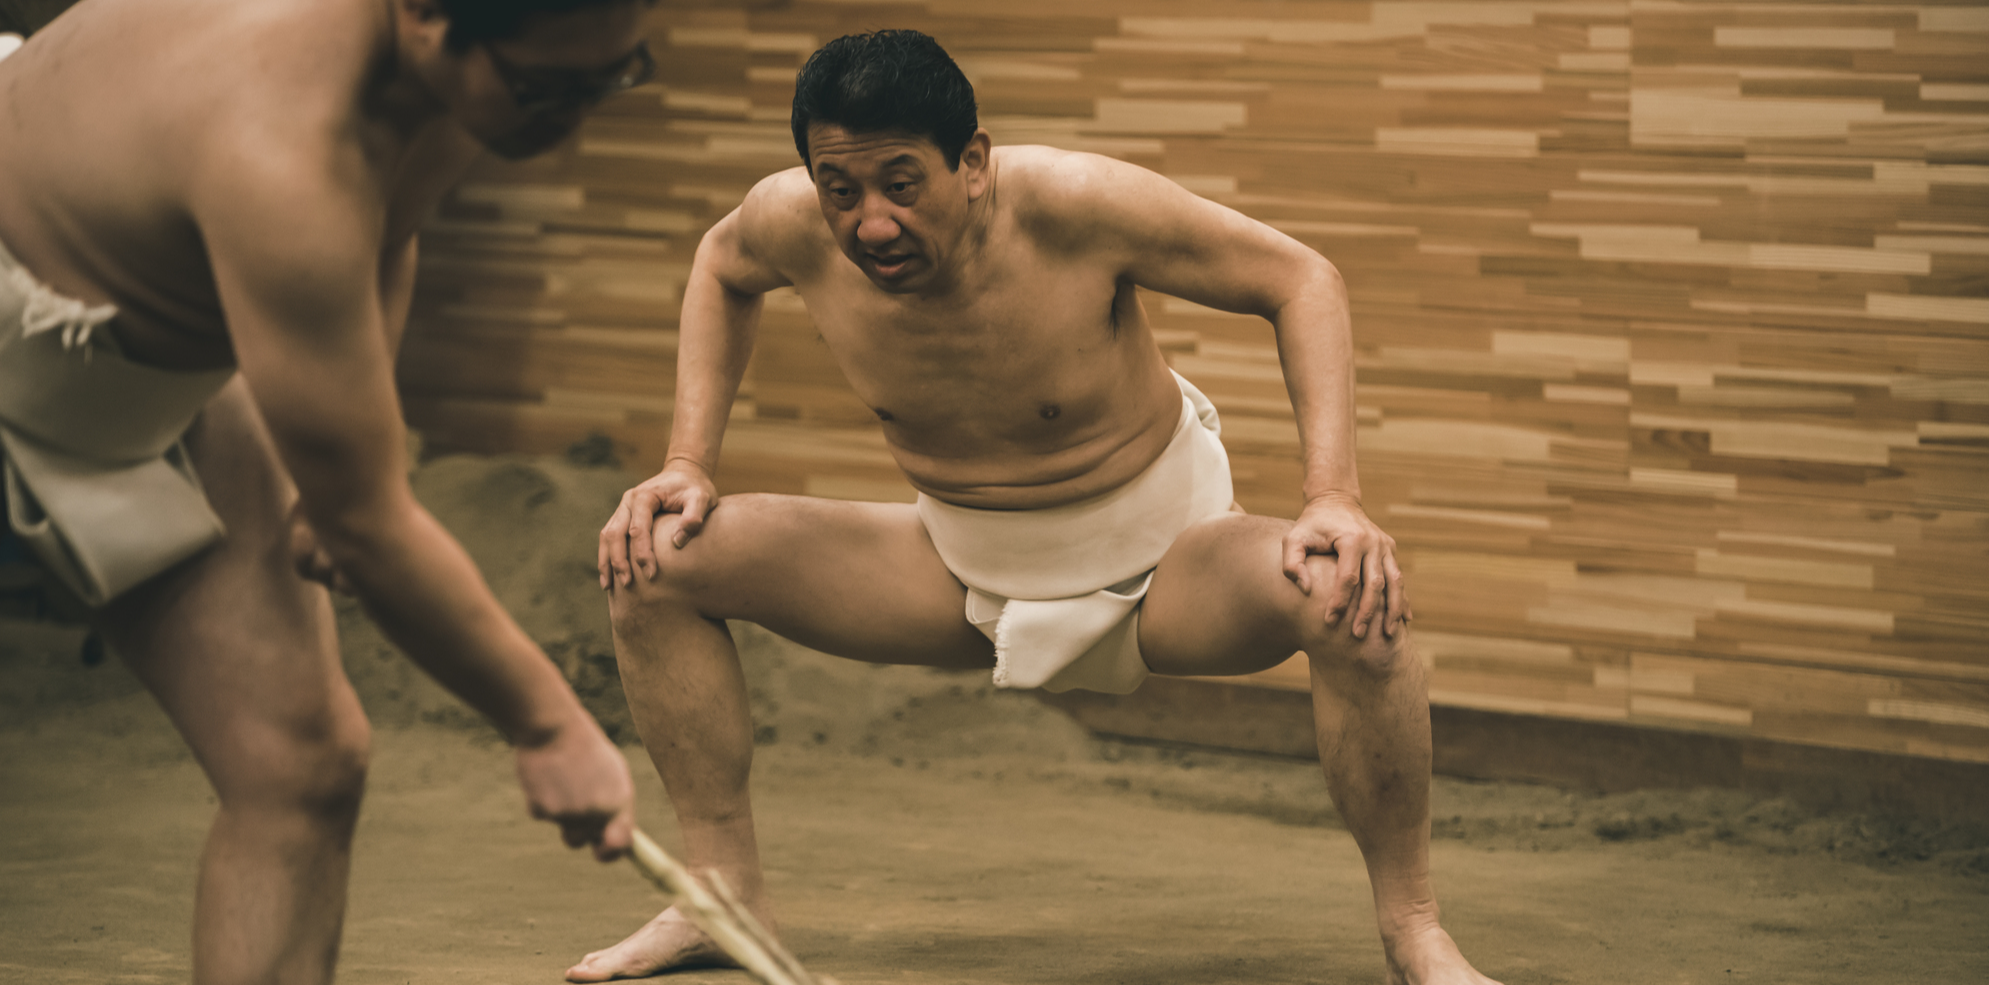 Book a Sumo Stable Practice Tour Tokyo – Watch Morning Sumo Training (Guide Optional)